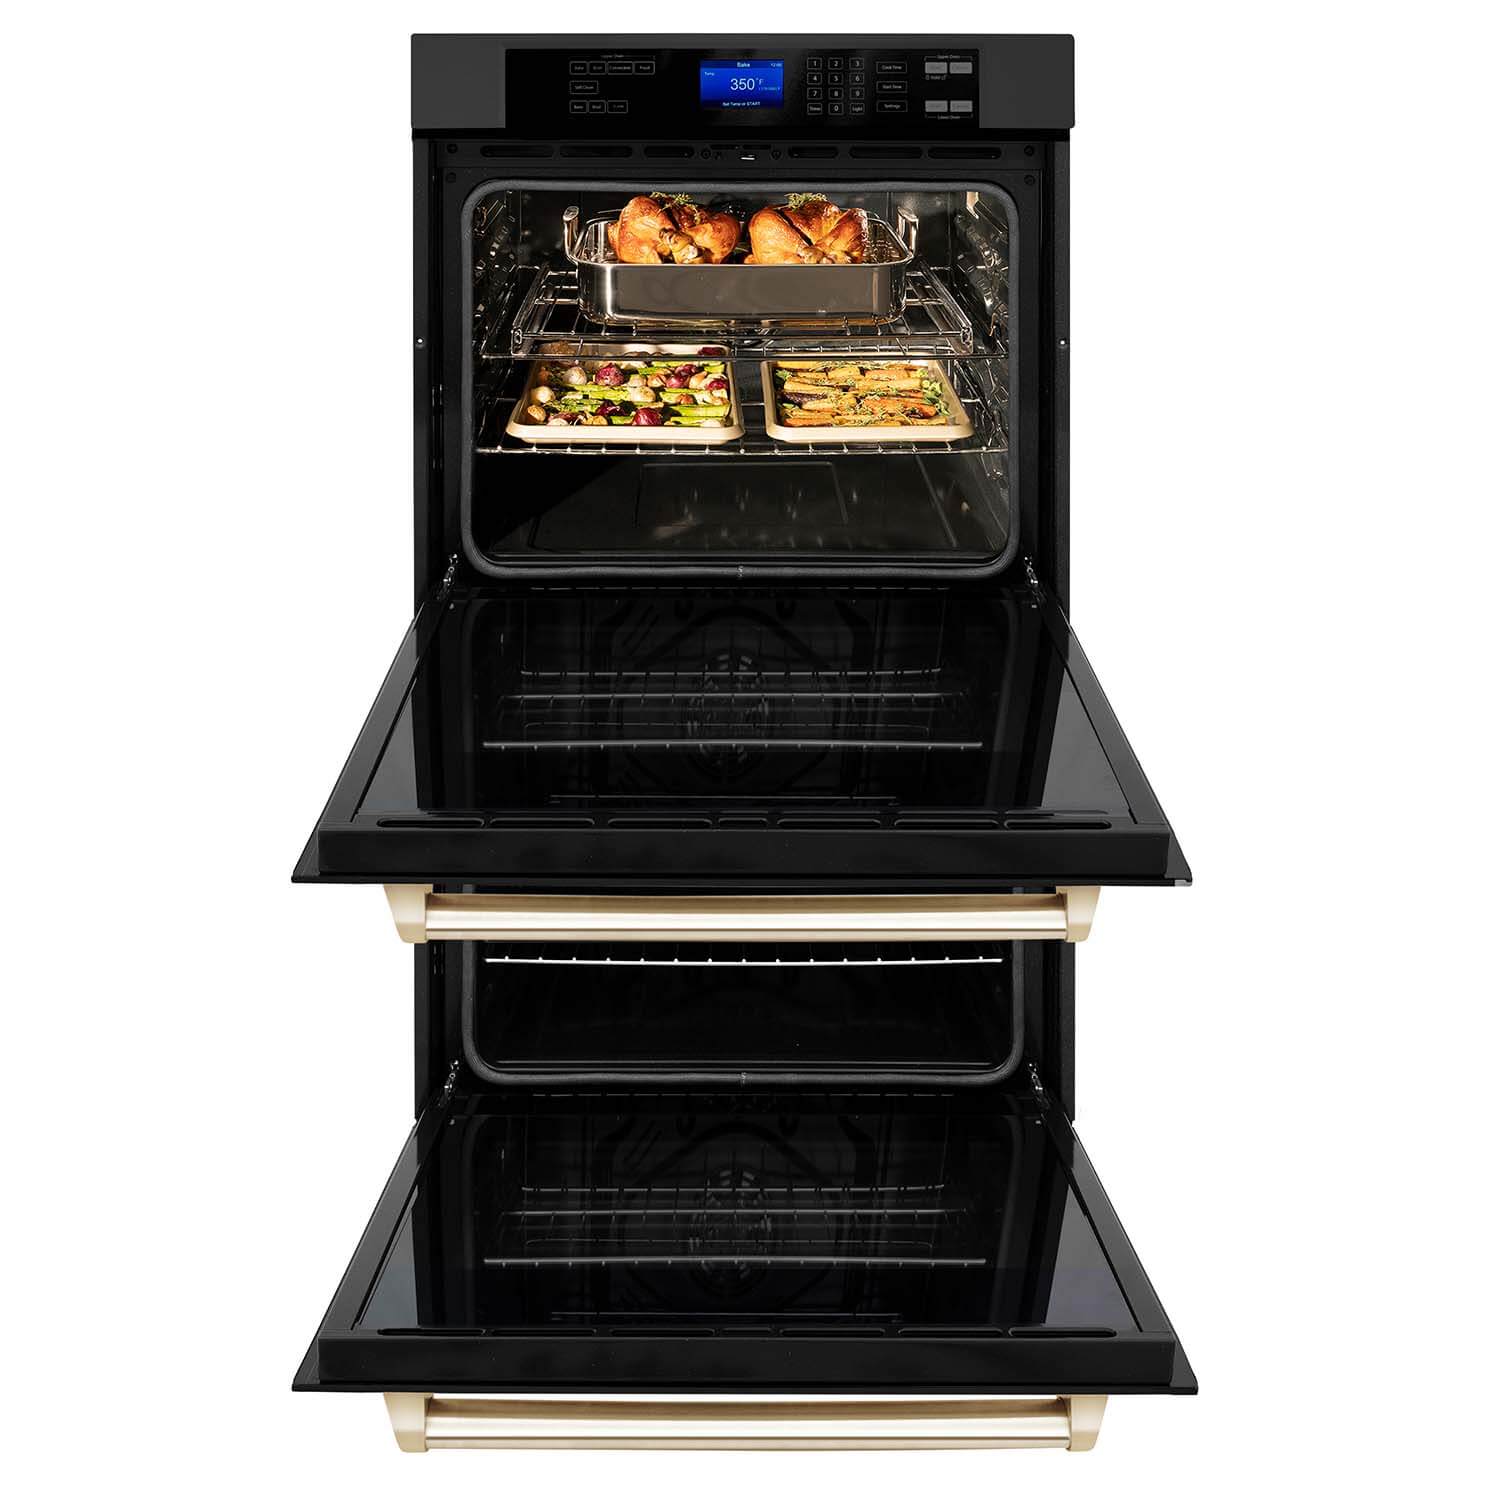 ZLINE double wall oven with doors open and food inside top oven.